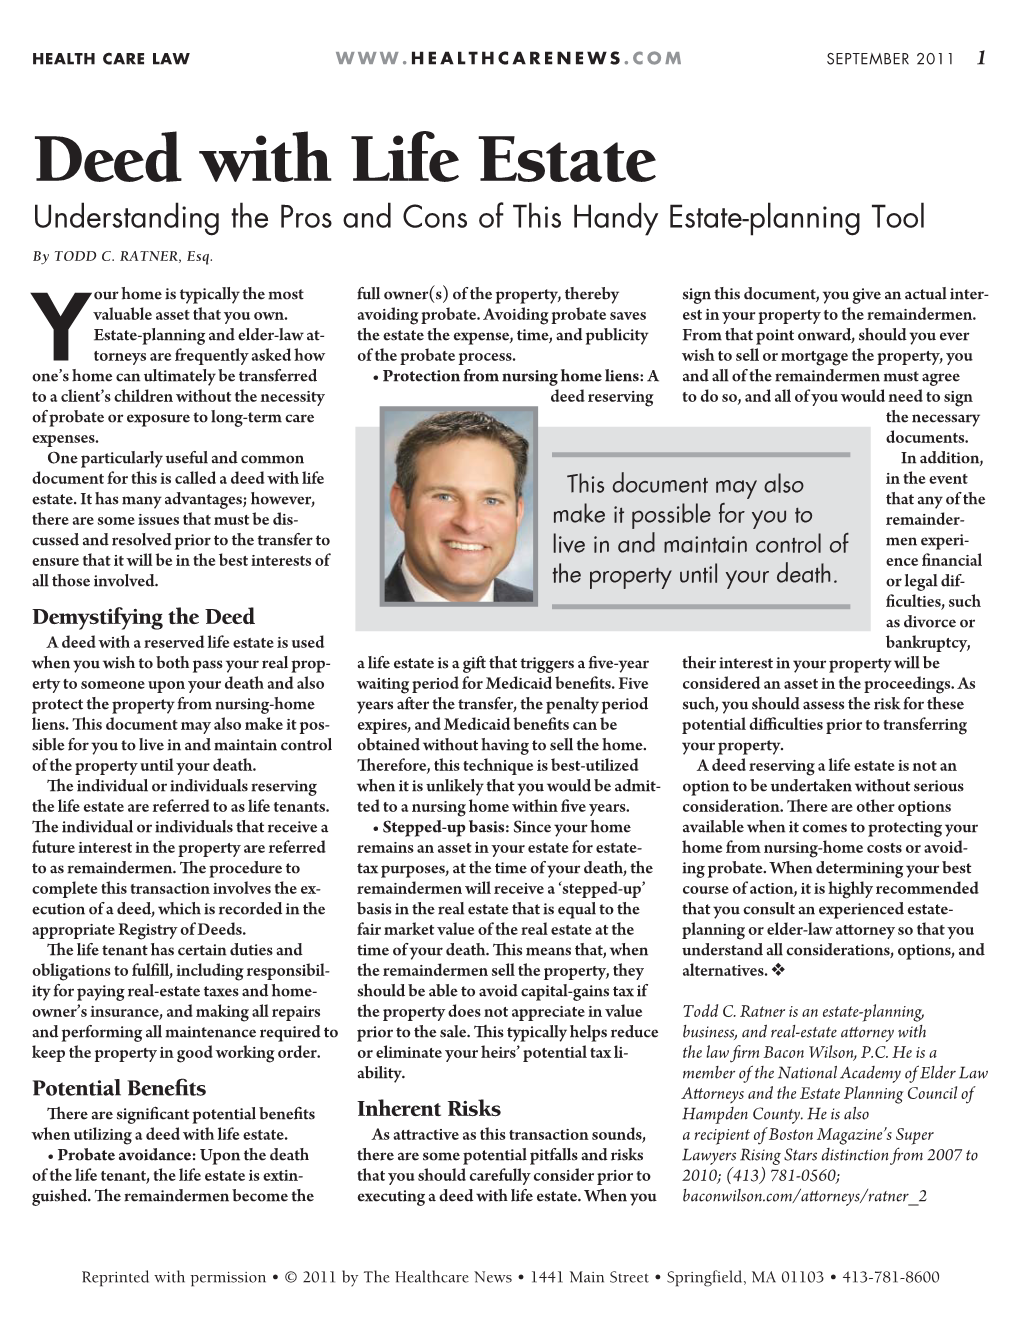 Deed with Life Estate Understanding the Pros and Cons of This Handy Estate-Planning Tool by TODD C